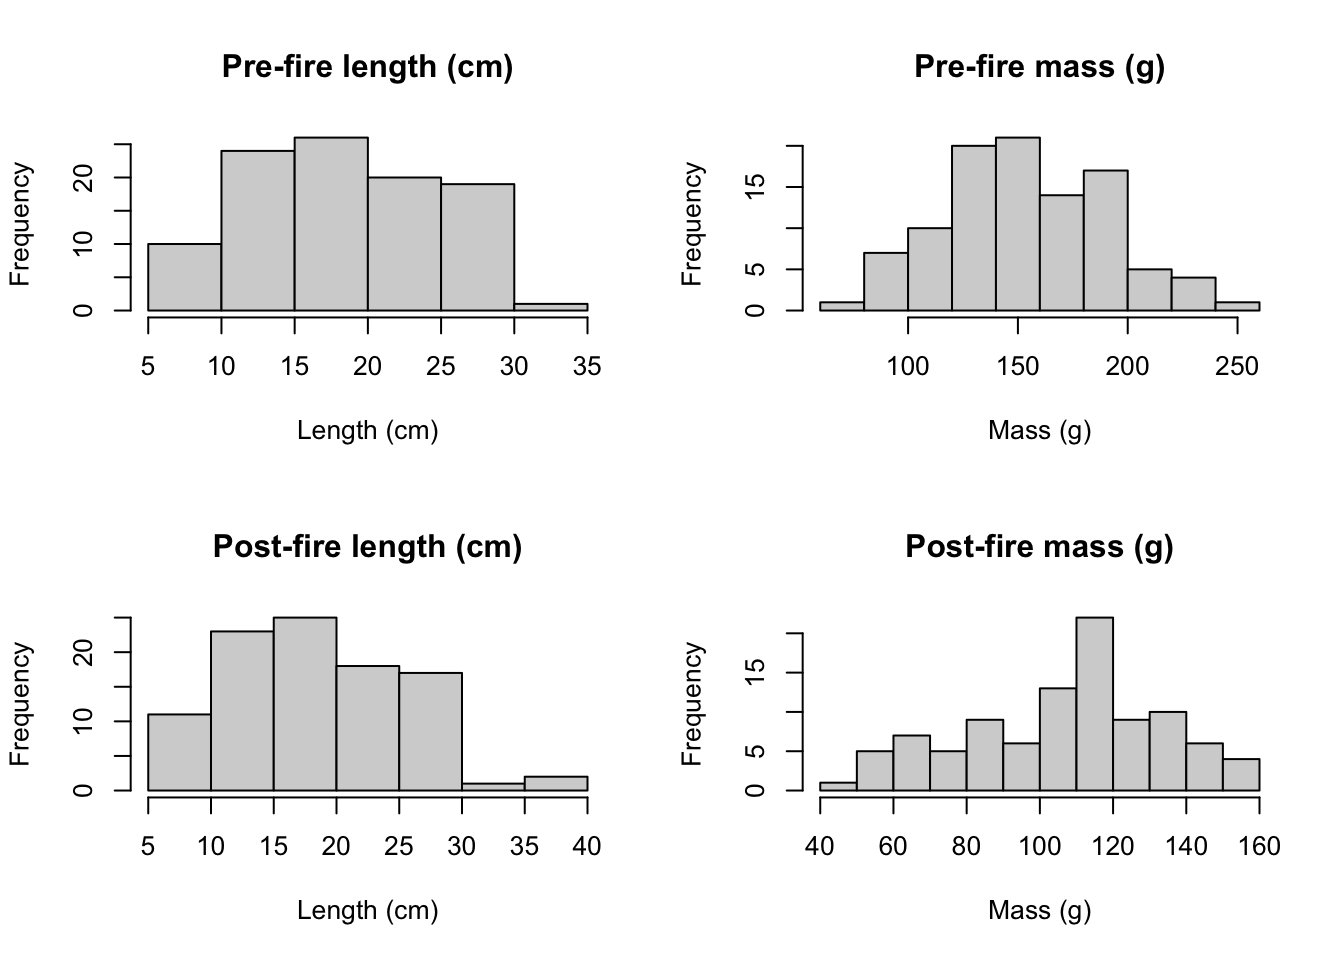 Histograms showing frequency of various lengths in centimeters and masses in grams of fish in in Cache La Poudre Watershed in 2012 before the High Park Fire (Pre-fire) and in 2013 after the High Park Fire (Post-fire).